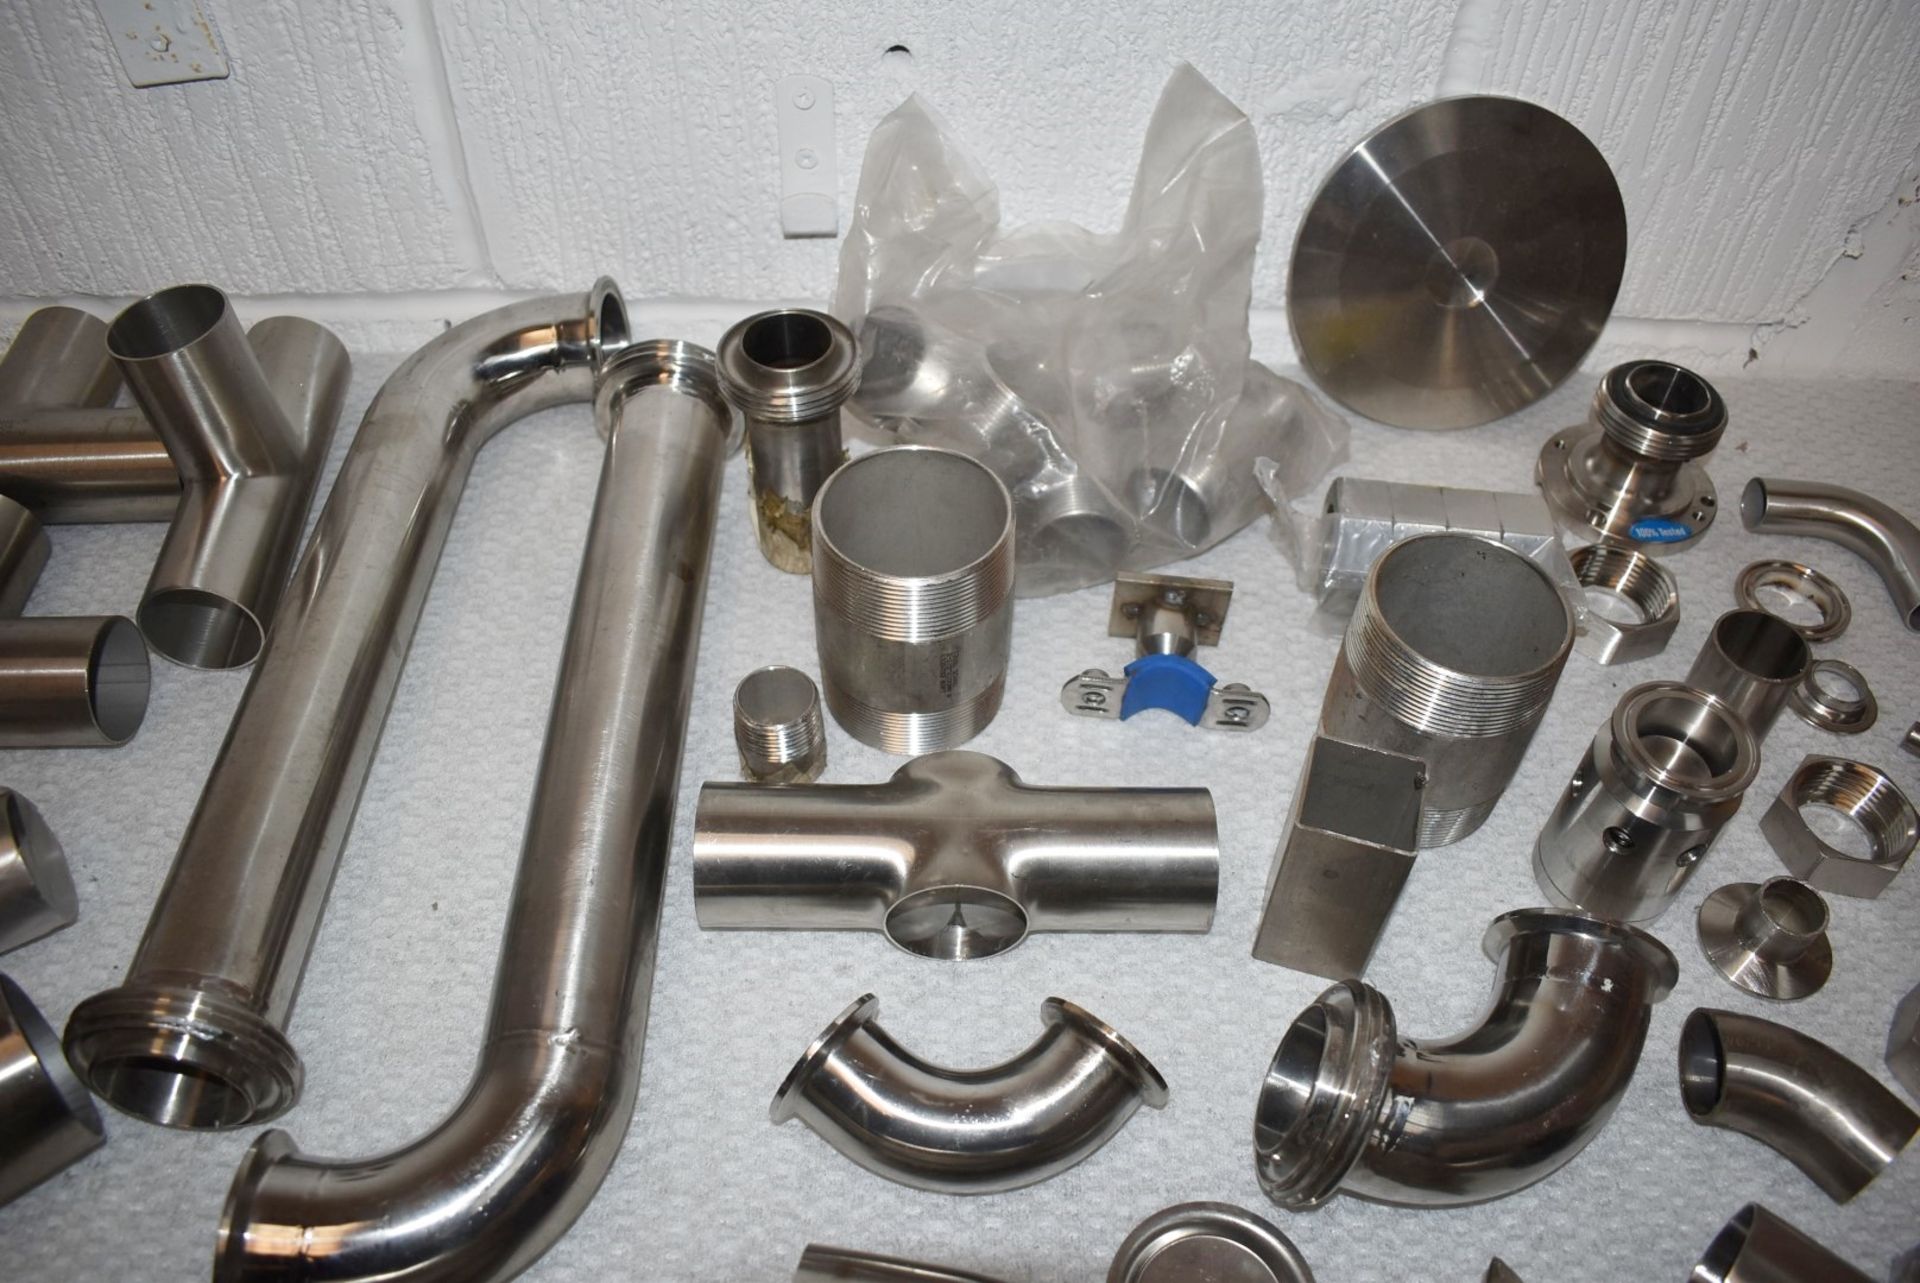 Assorted Job Lot of Stainless Steel Fittings For Brewery Equipment - Includes Approx 60 Pieces - - Image 5 of 17